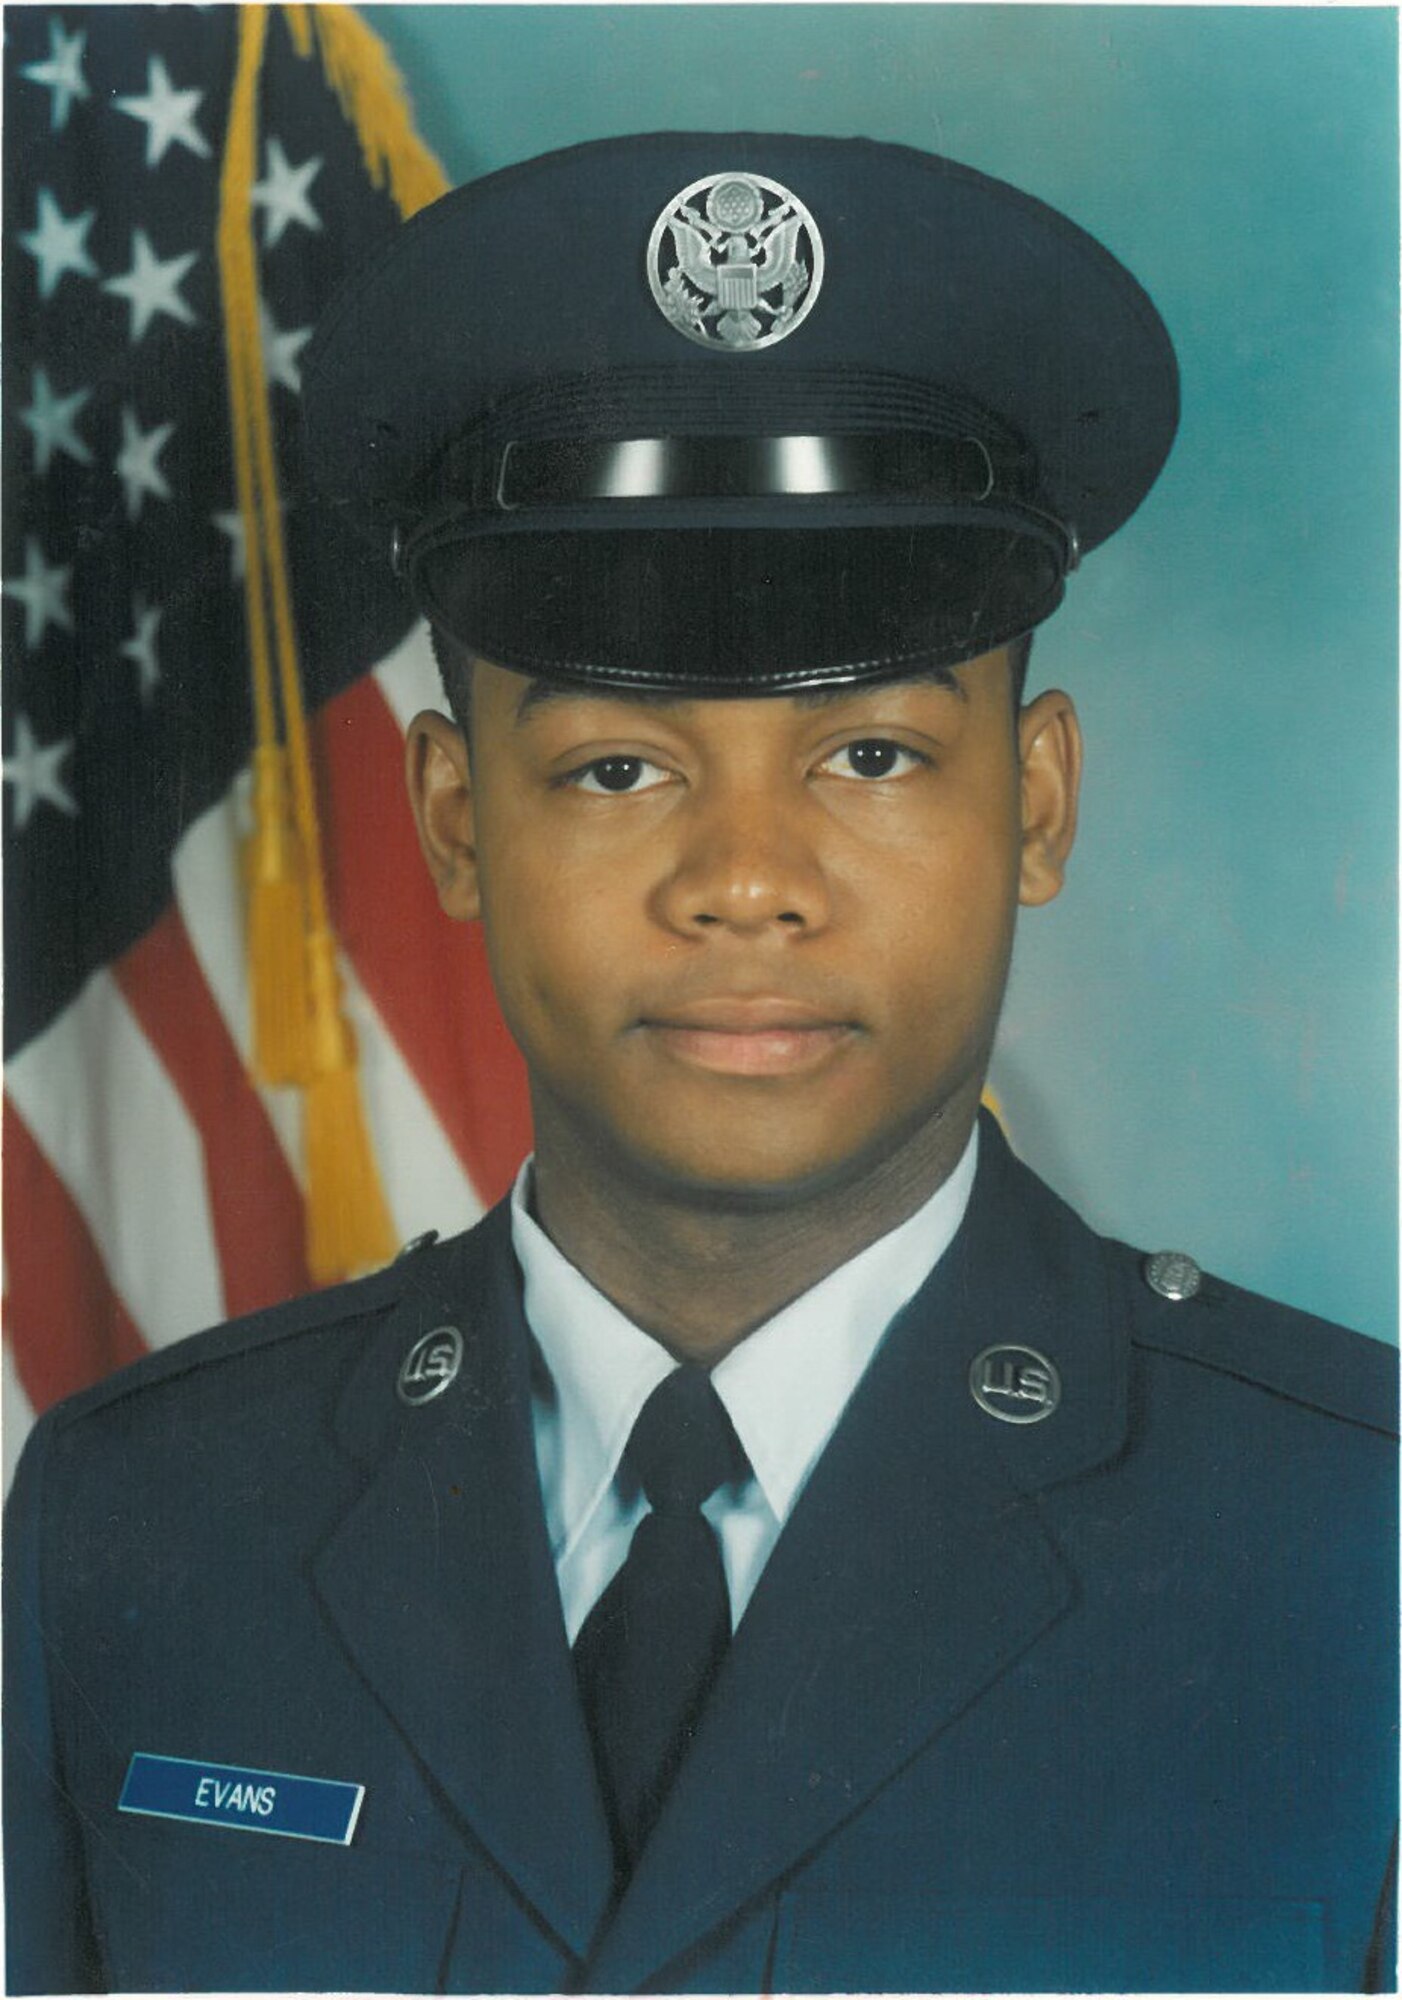 Chief Master Sgt. Alfonzo Evans' first official photo in Air Force basic training. (Courtesy photo)